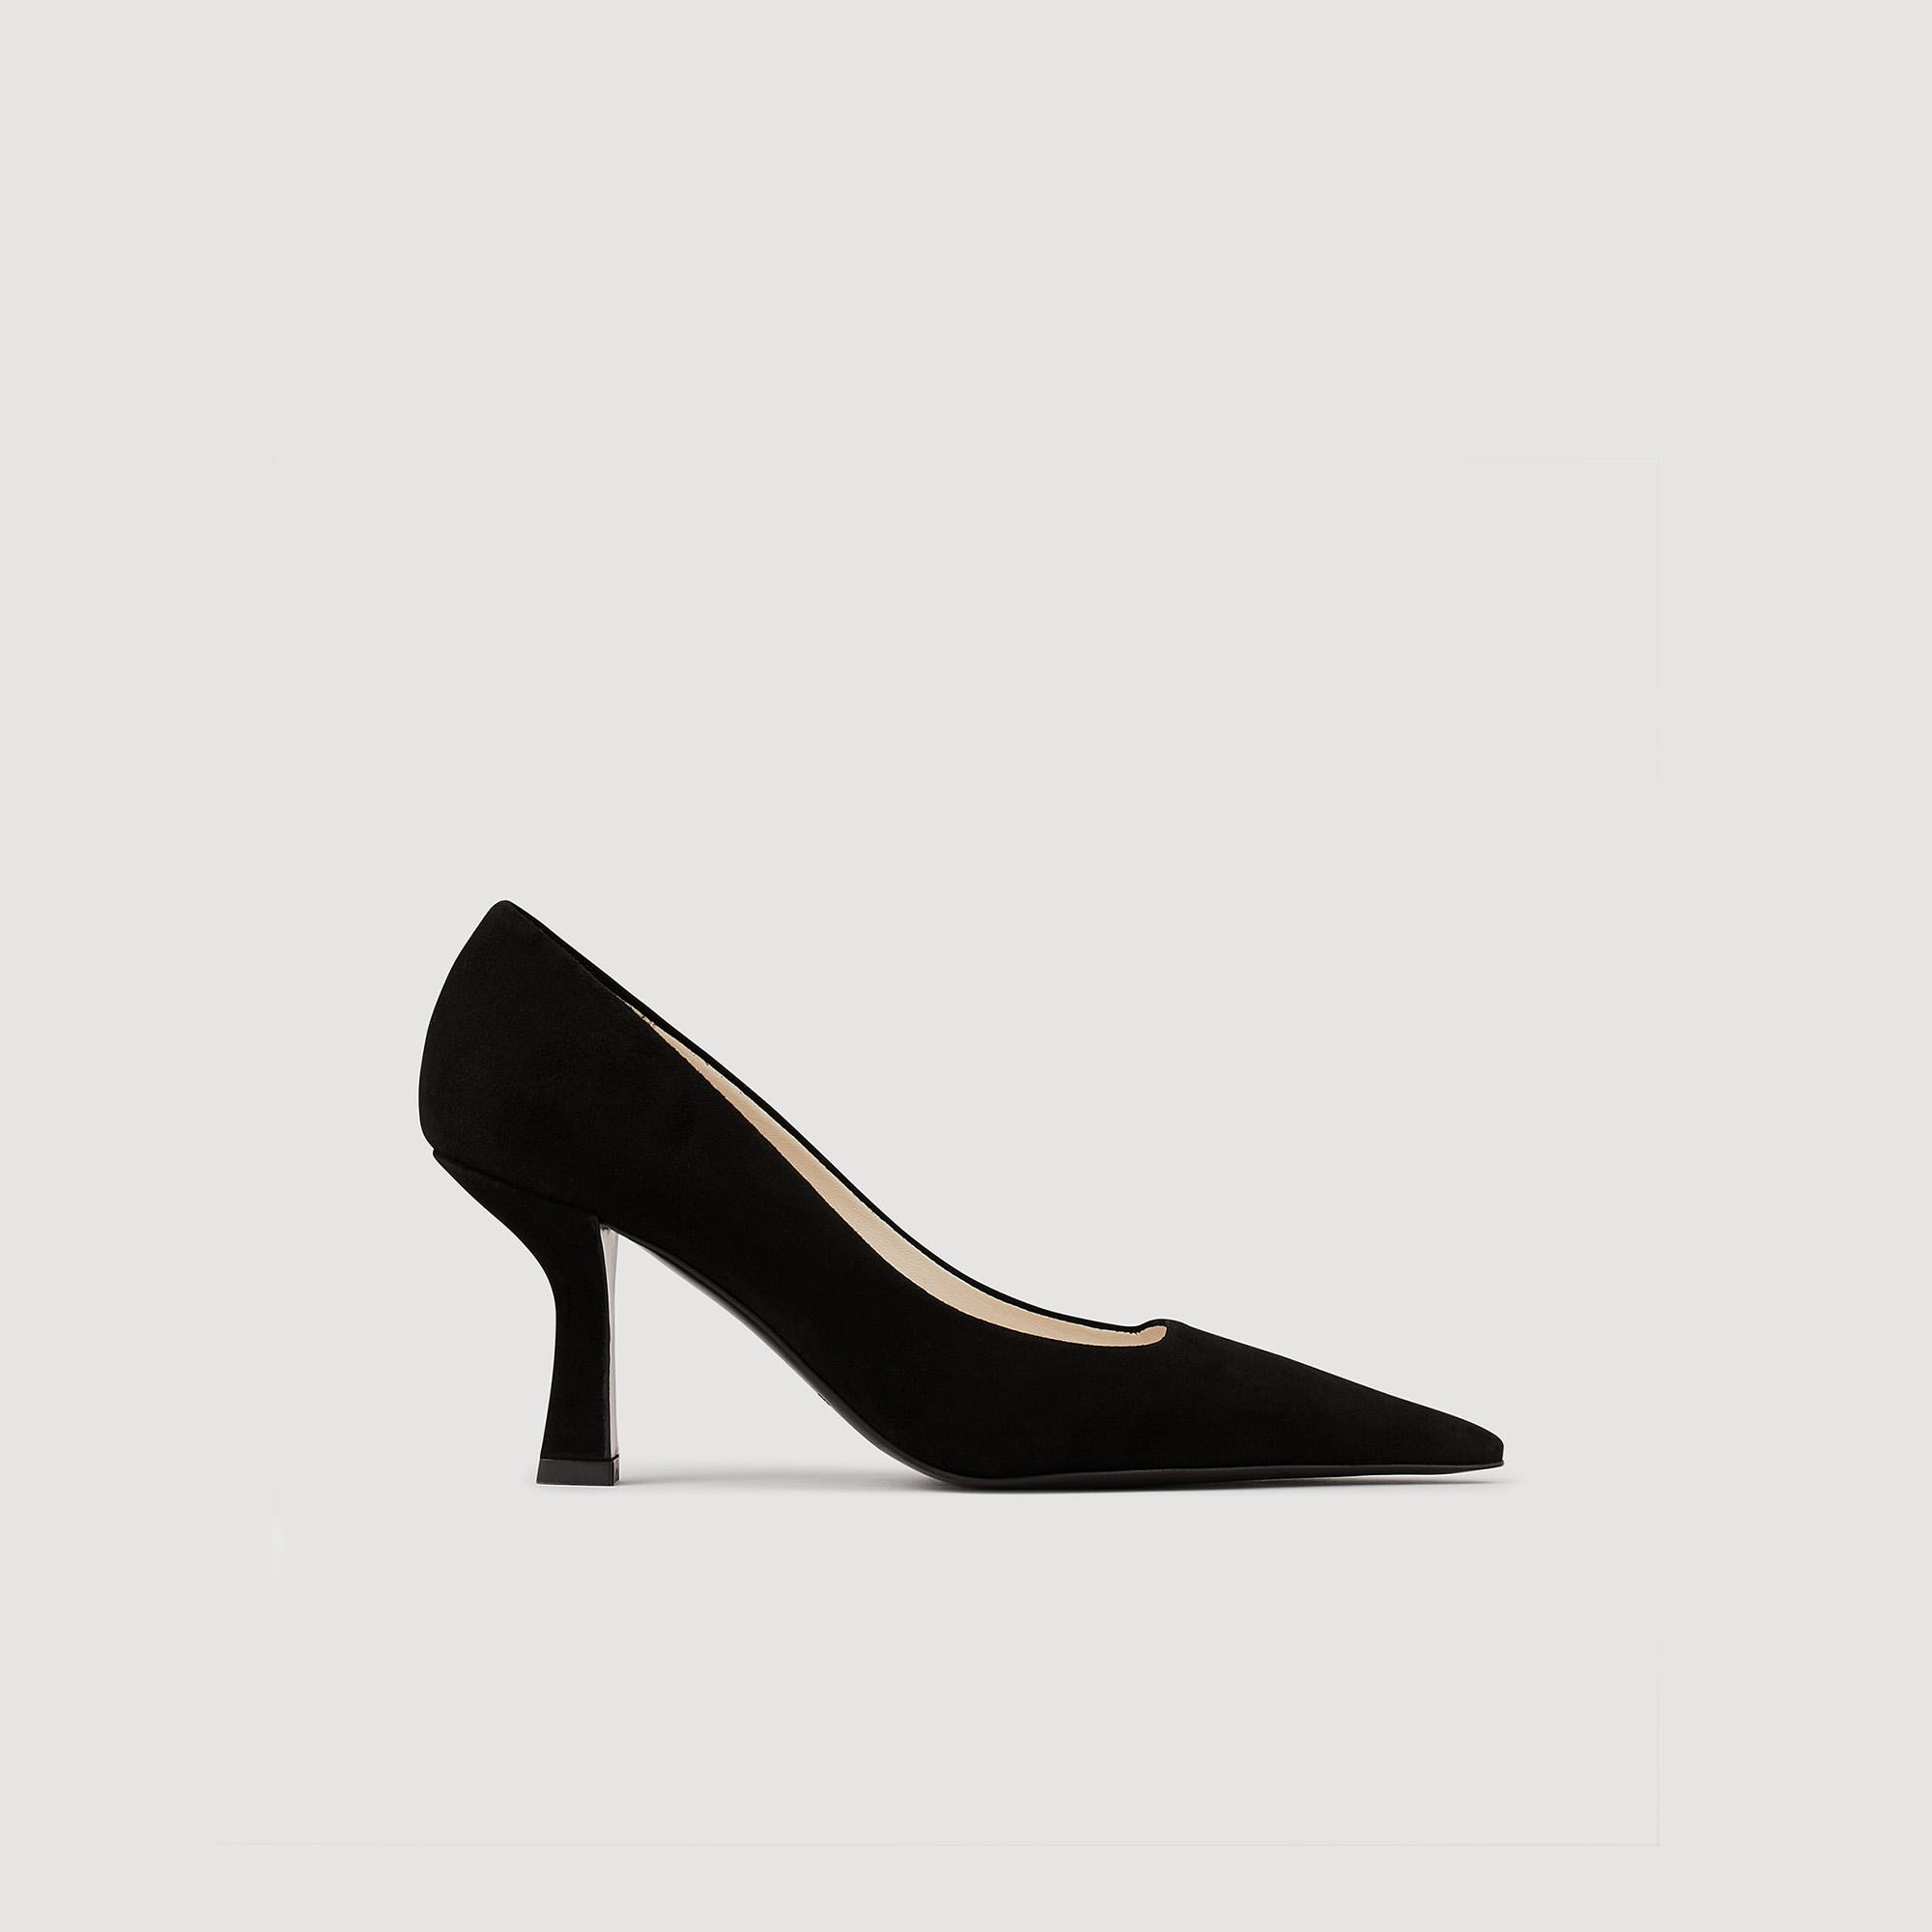 Sandro lamb Sock lining: Suede pumps with a pointed toe and curved heel